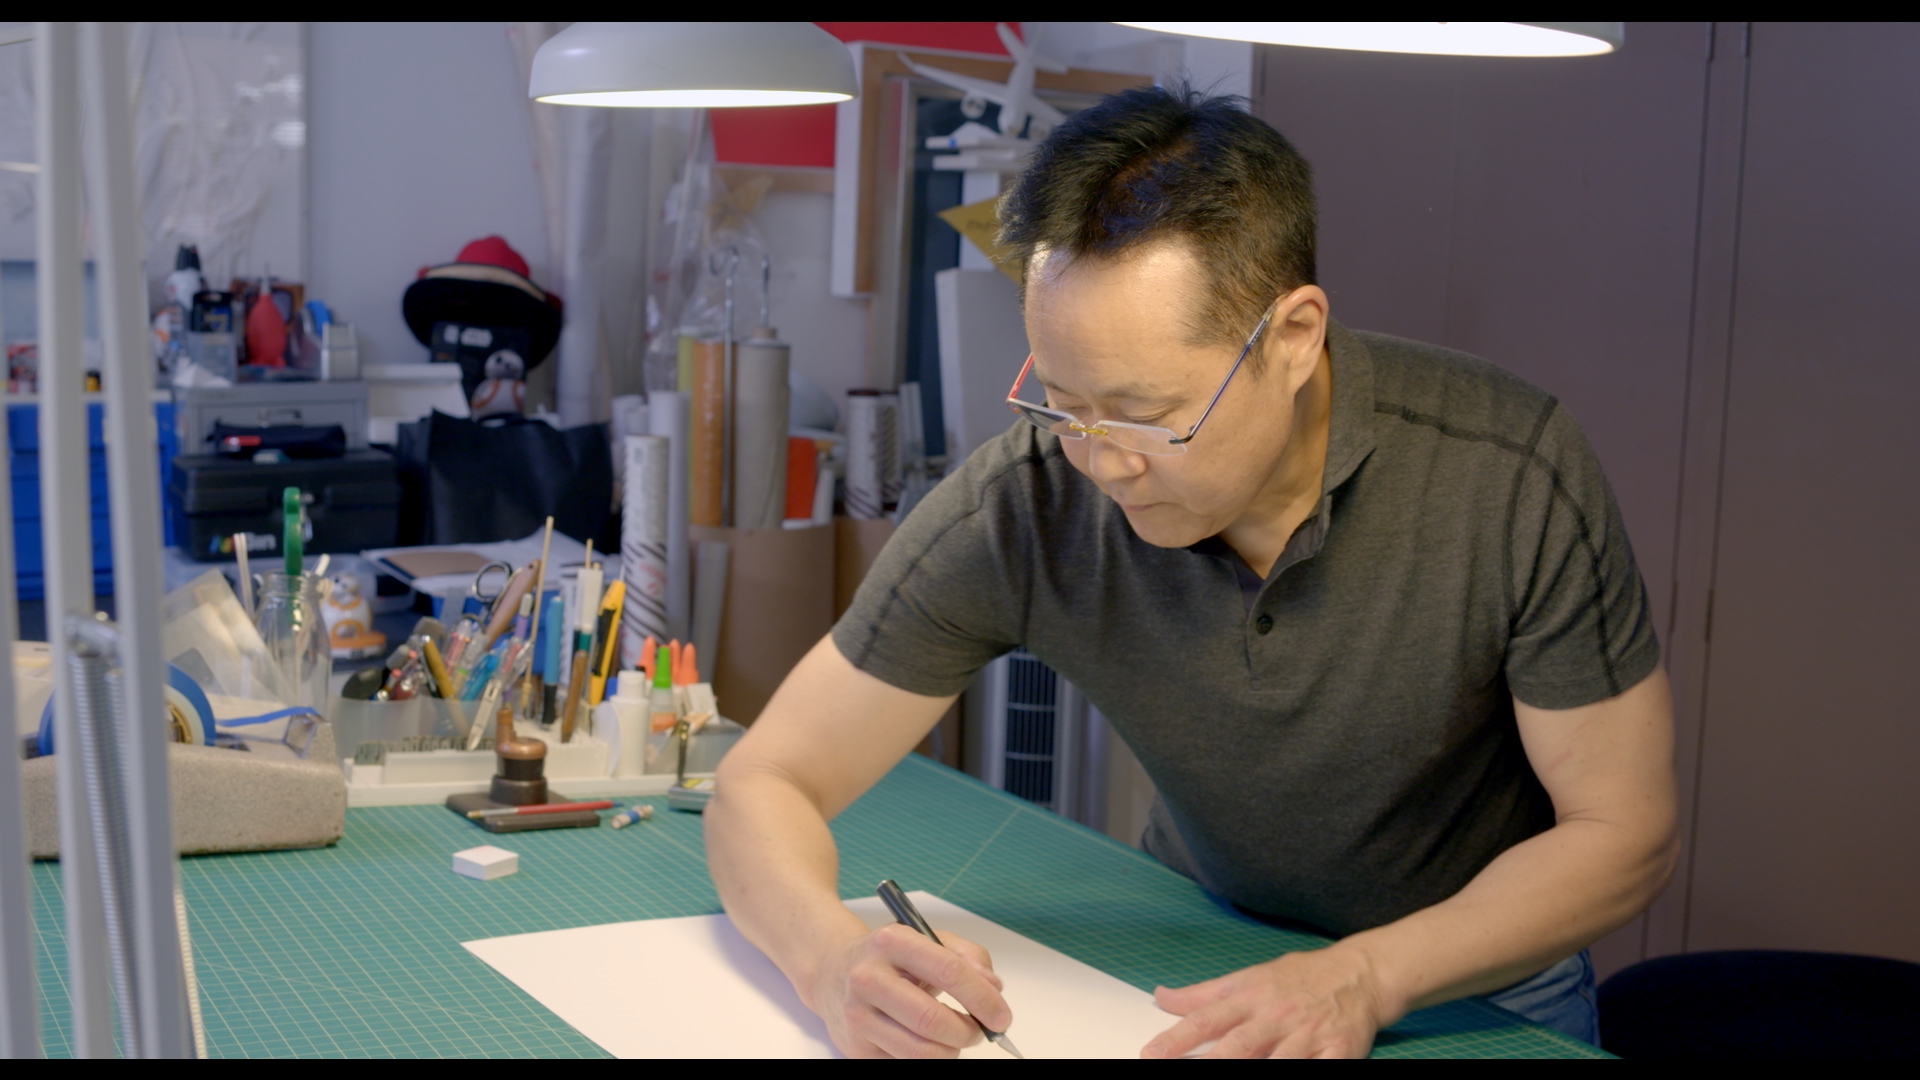 Movies for Artists - Jeff Nishinaka working in Somewhere in the Middle